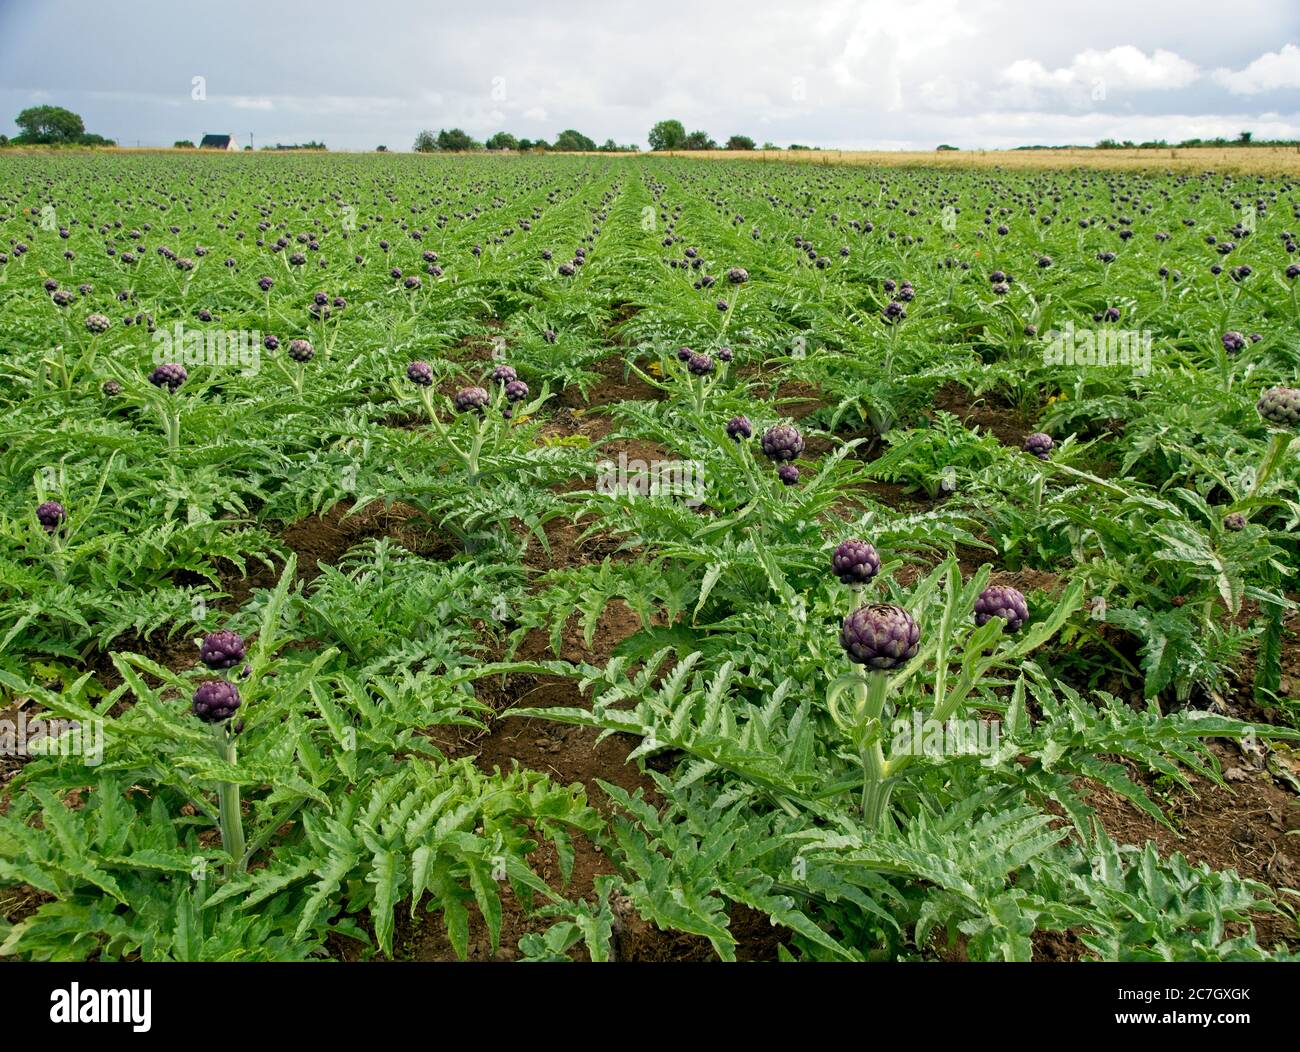 Fields with artichokes (Cynara cardunculus) in France Stock Photo